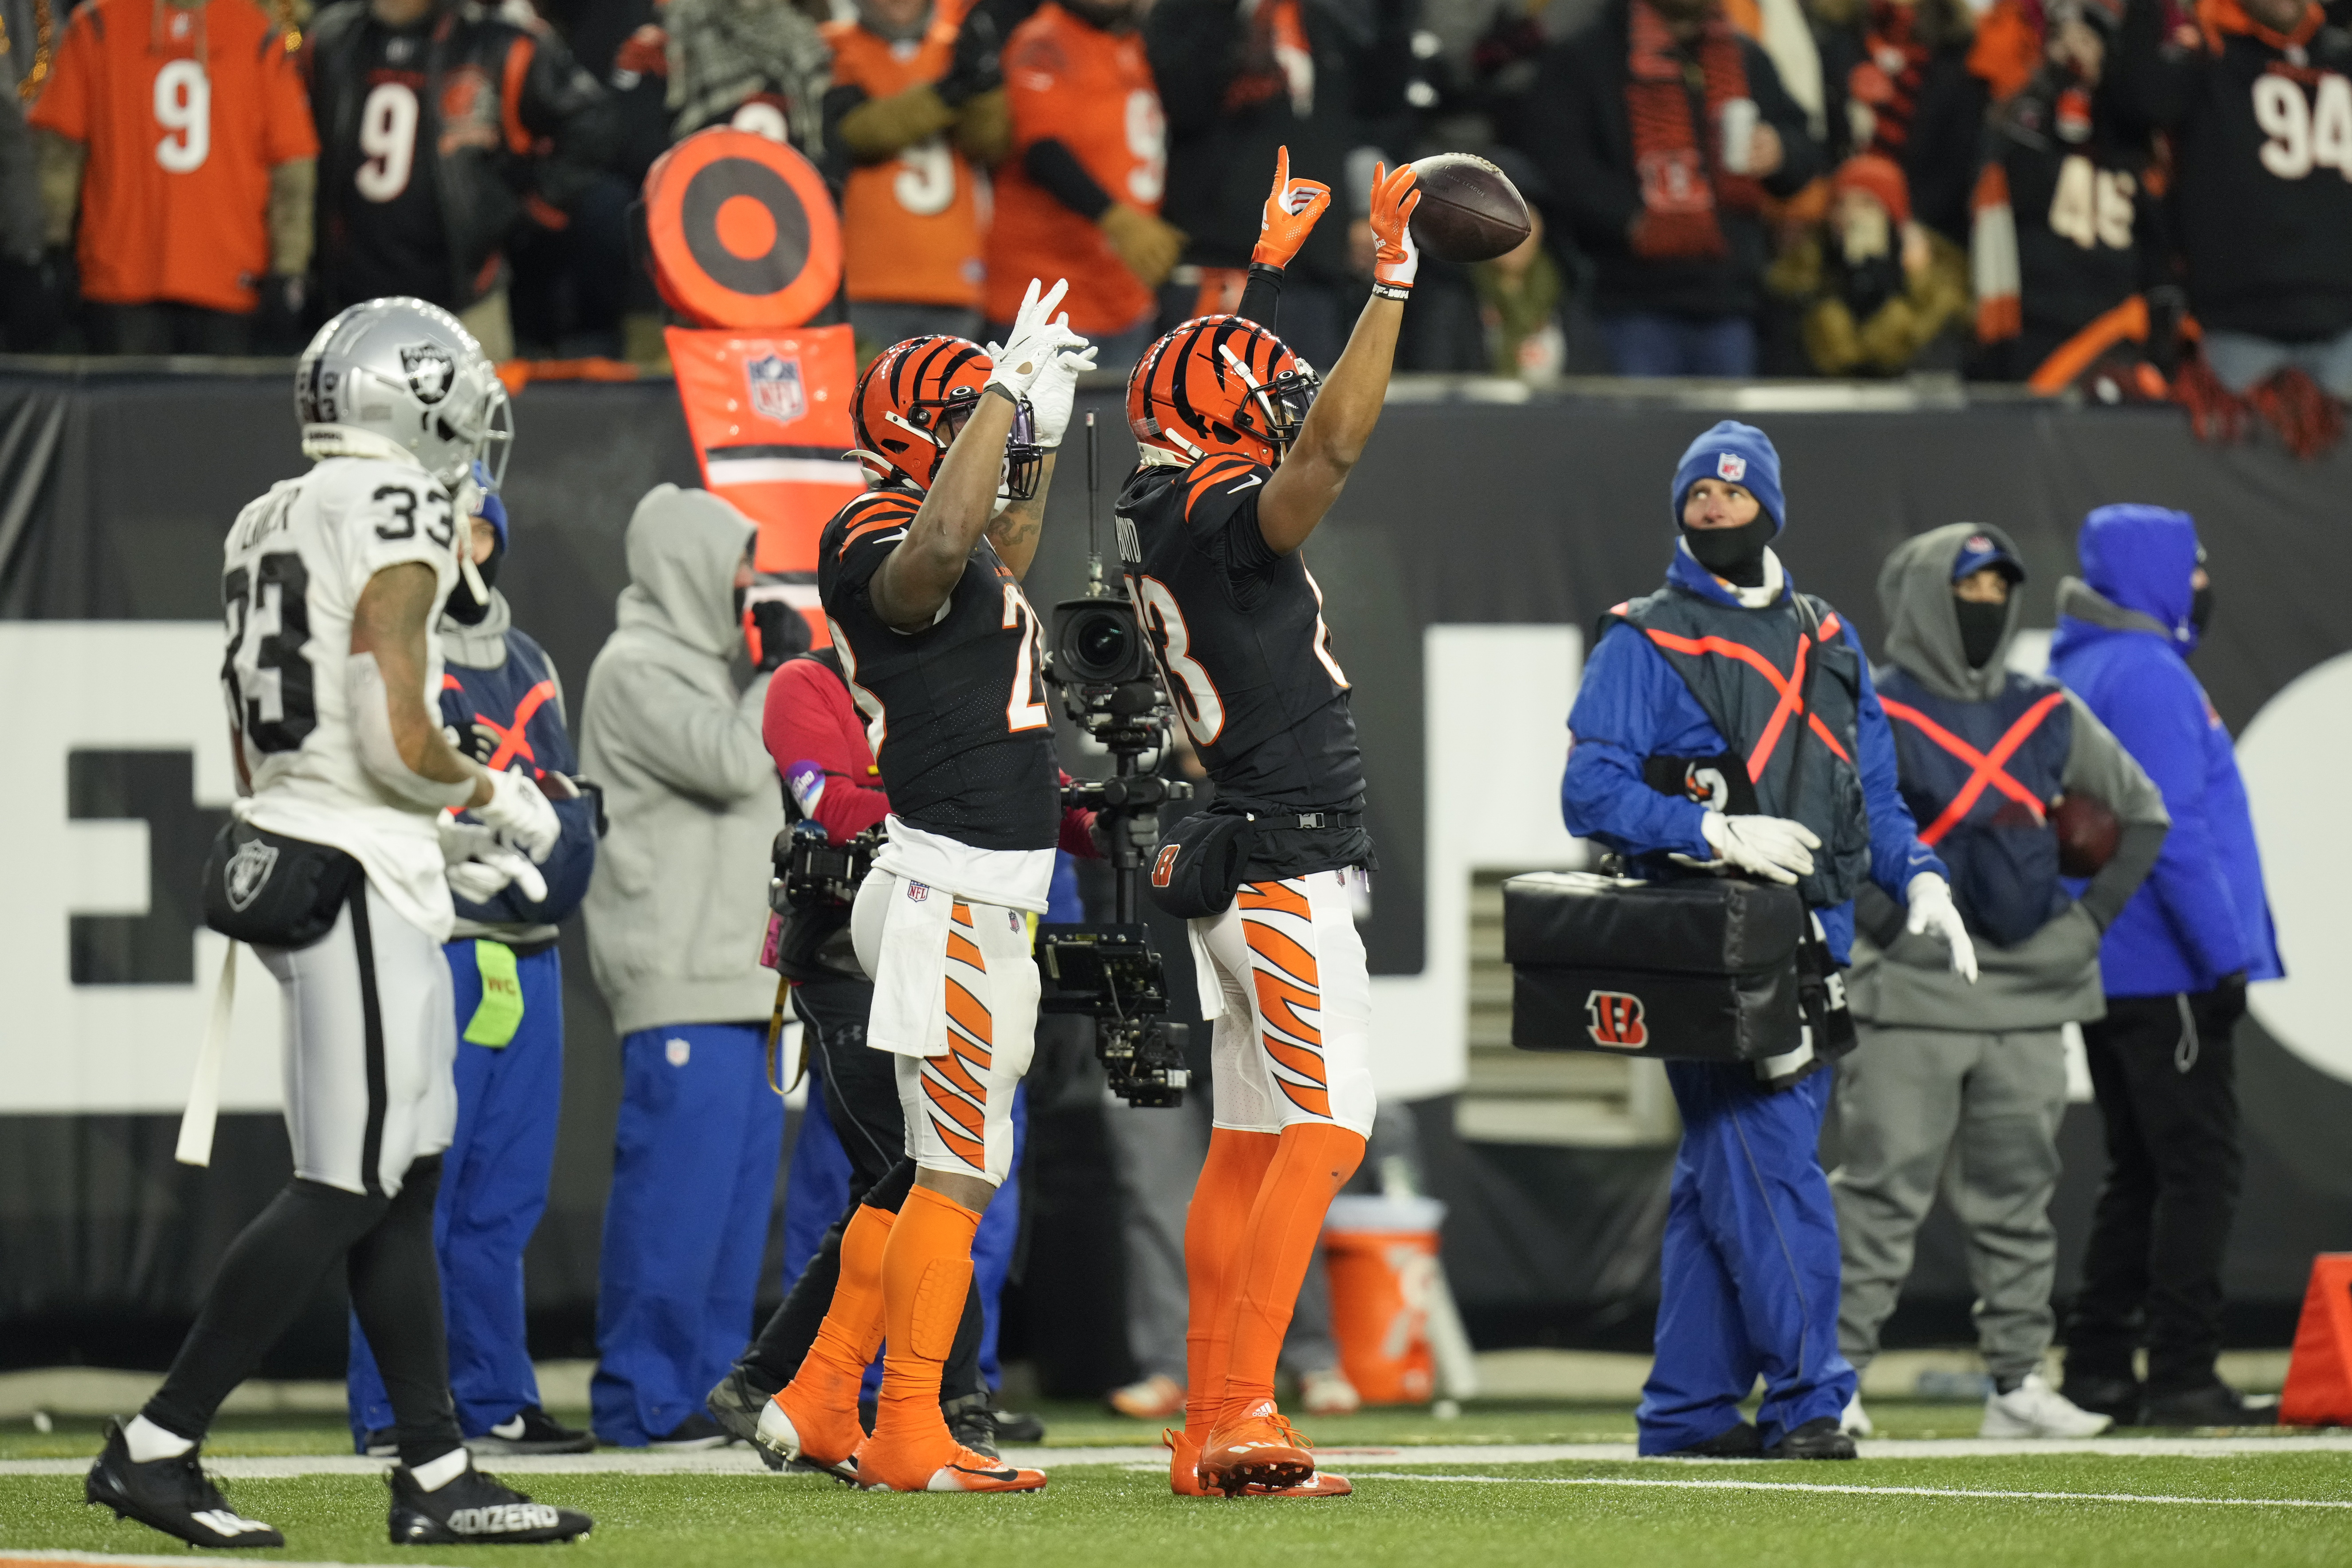 Bengals win first playoff game since 1991, eliminate Raiders